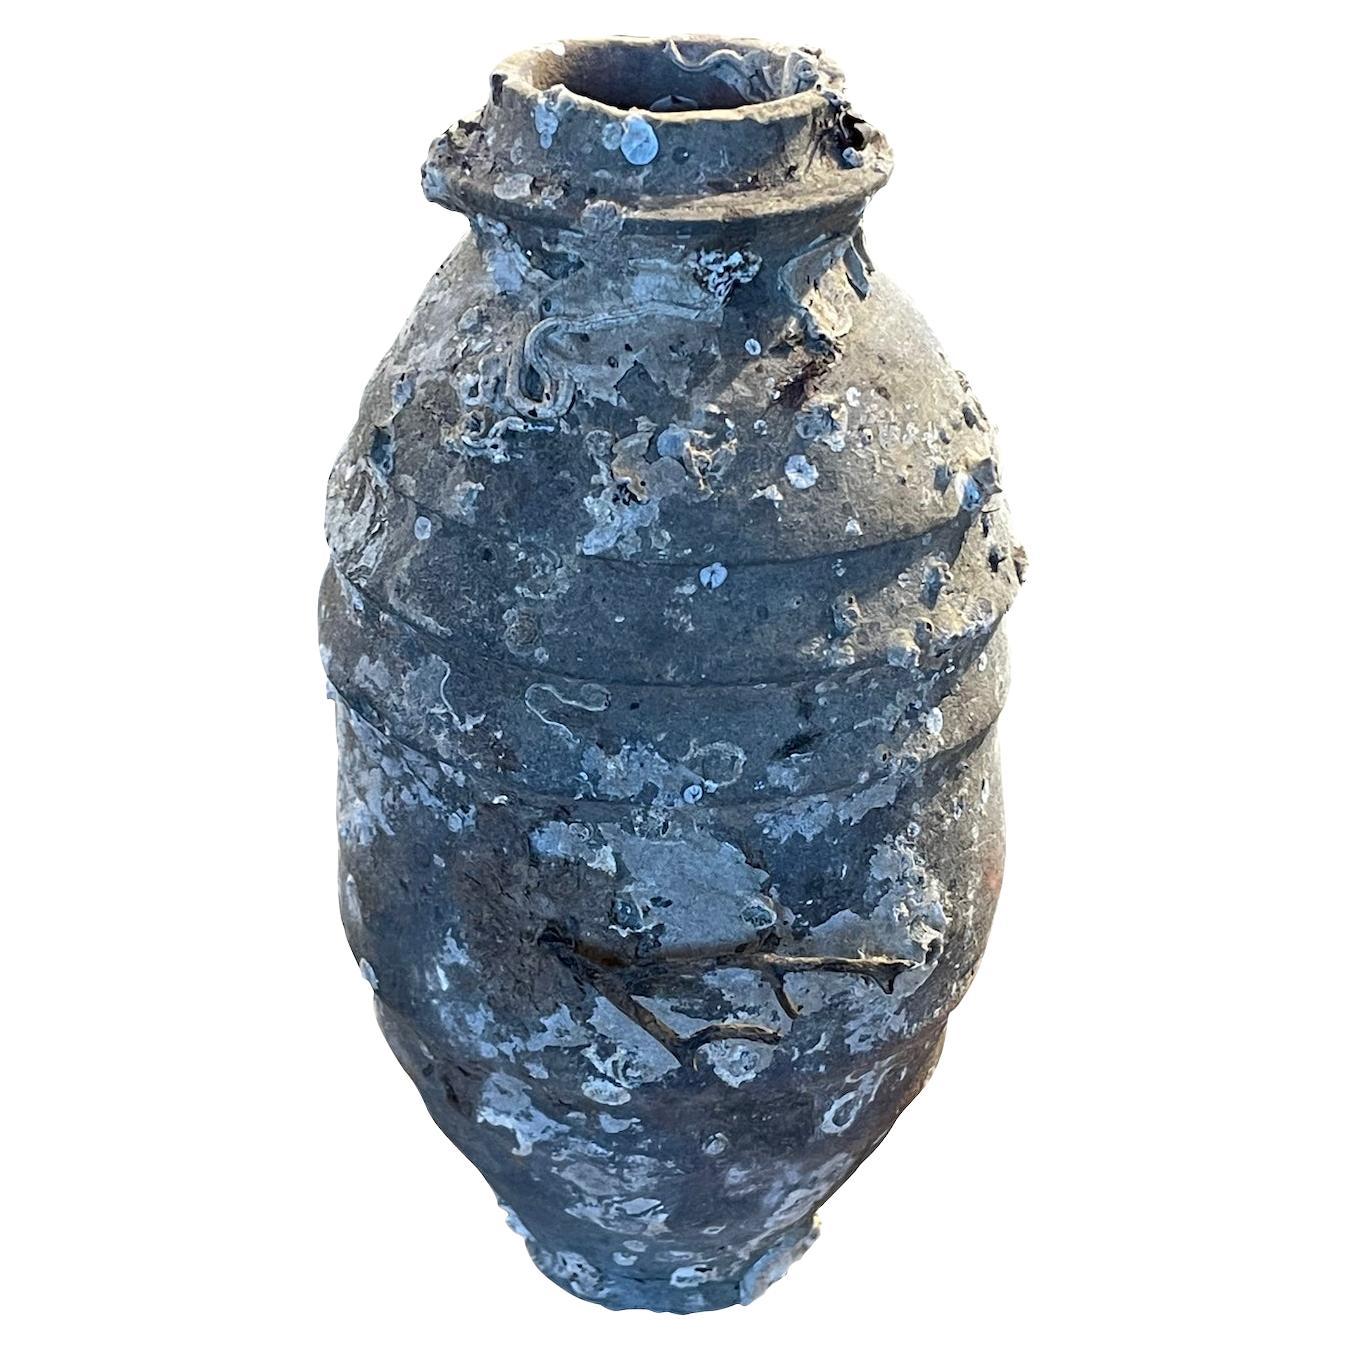 13th century Chinese Song dynasty ship wrecked vase.
Museum quality.
Beautiful natural shells and barnacles from being under water
for hundreds of years
Four similar styles are available and sold individually.